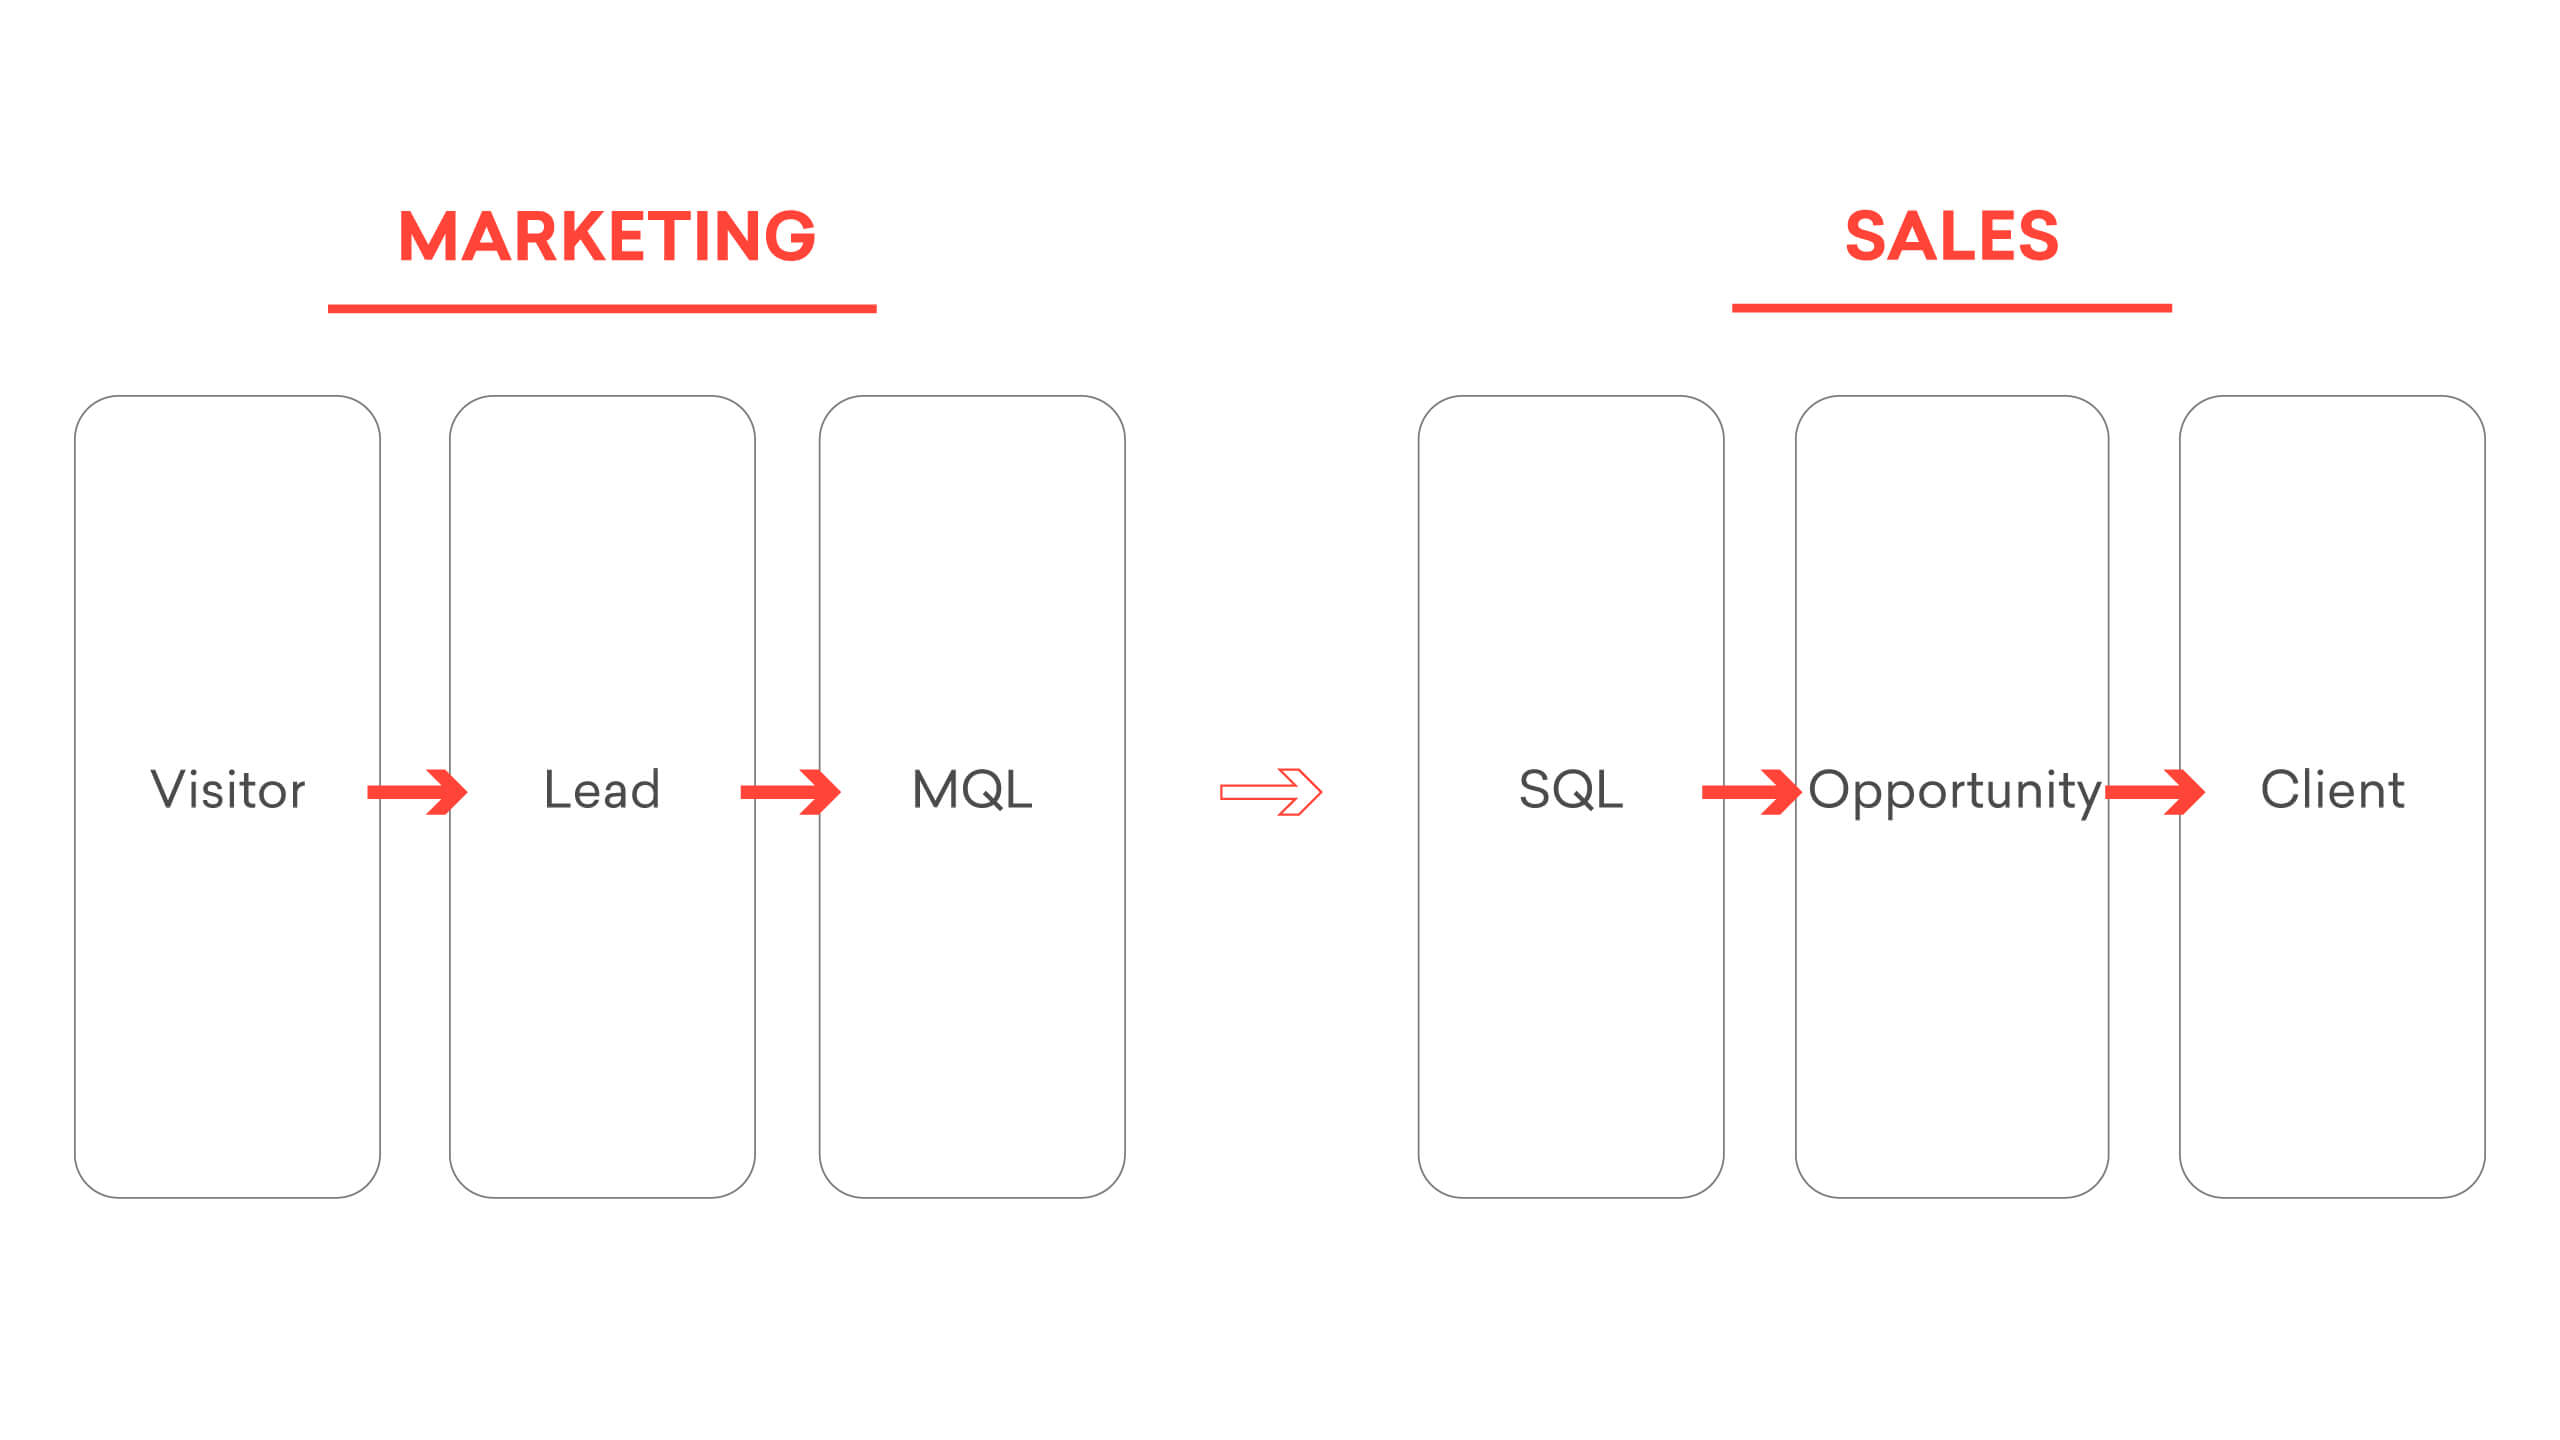 Buyers' journey shown going through marketing and sales funnels